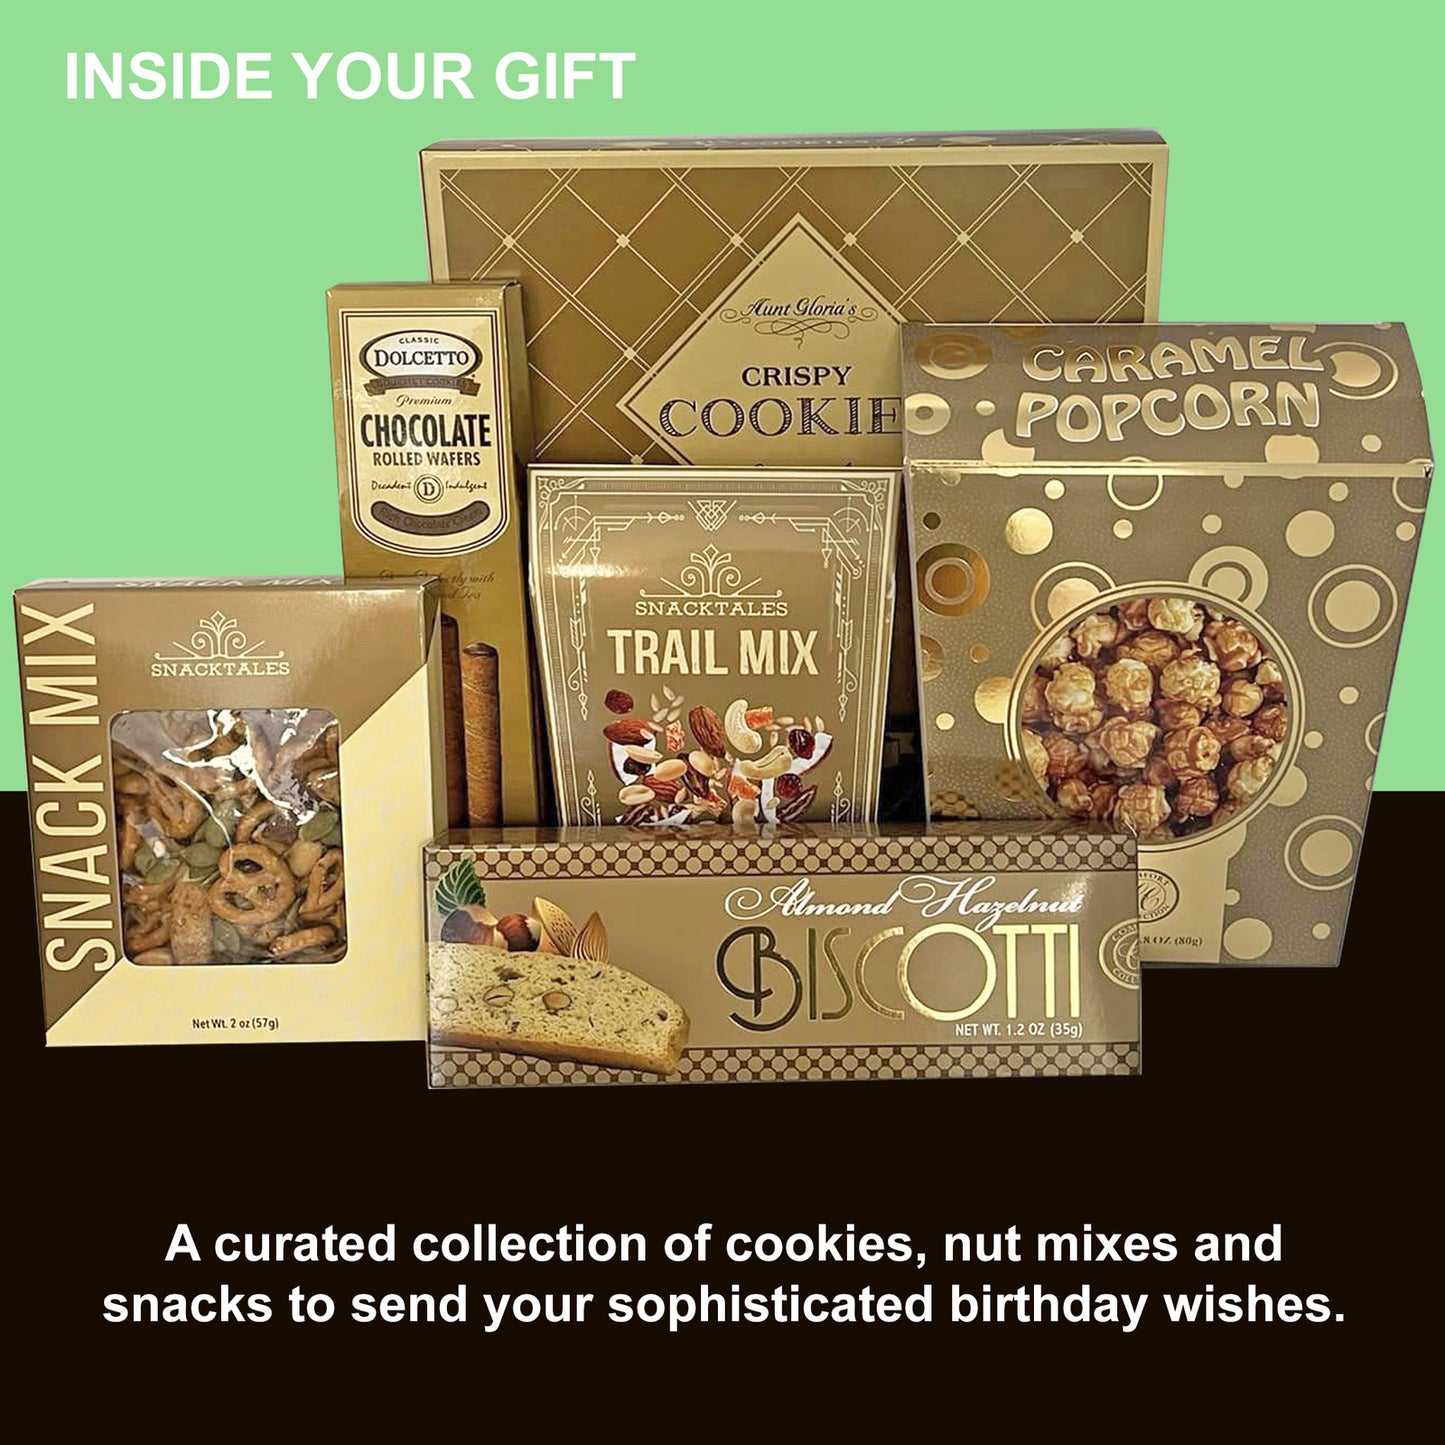 Fabulous Birthday Gift Box for Men, Women, Students, Military, Friends and Family